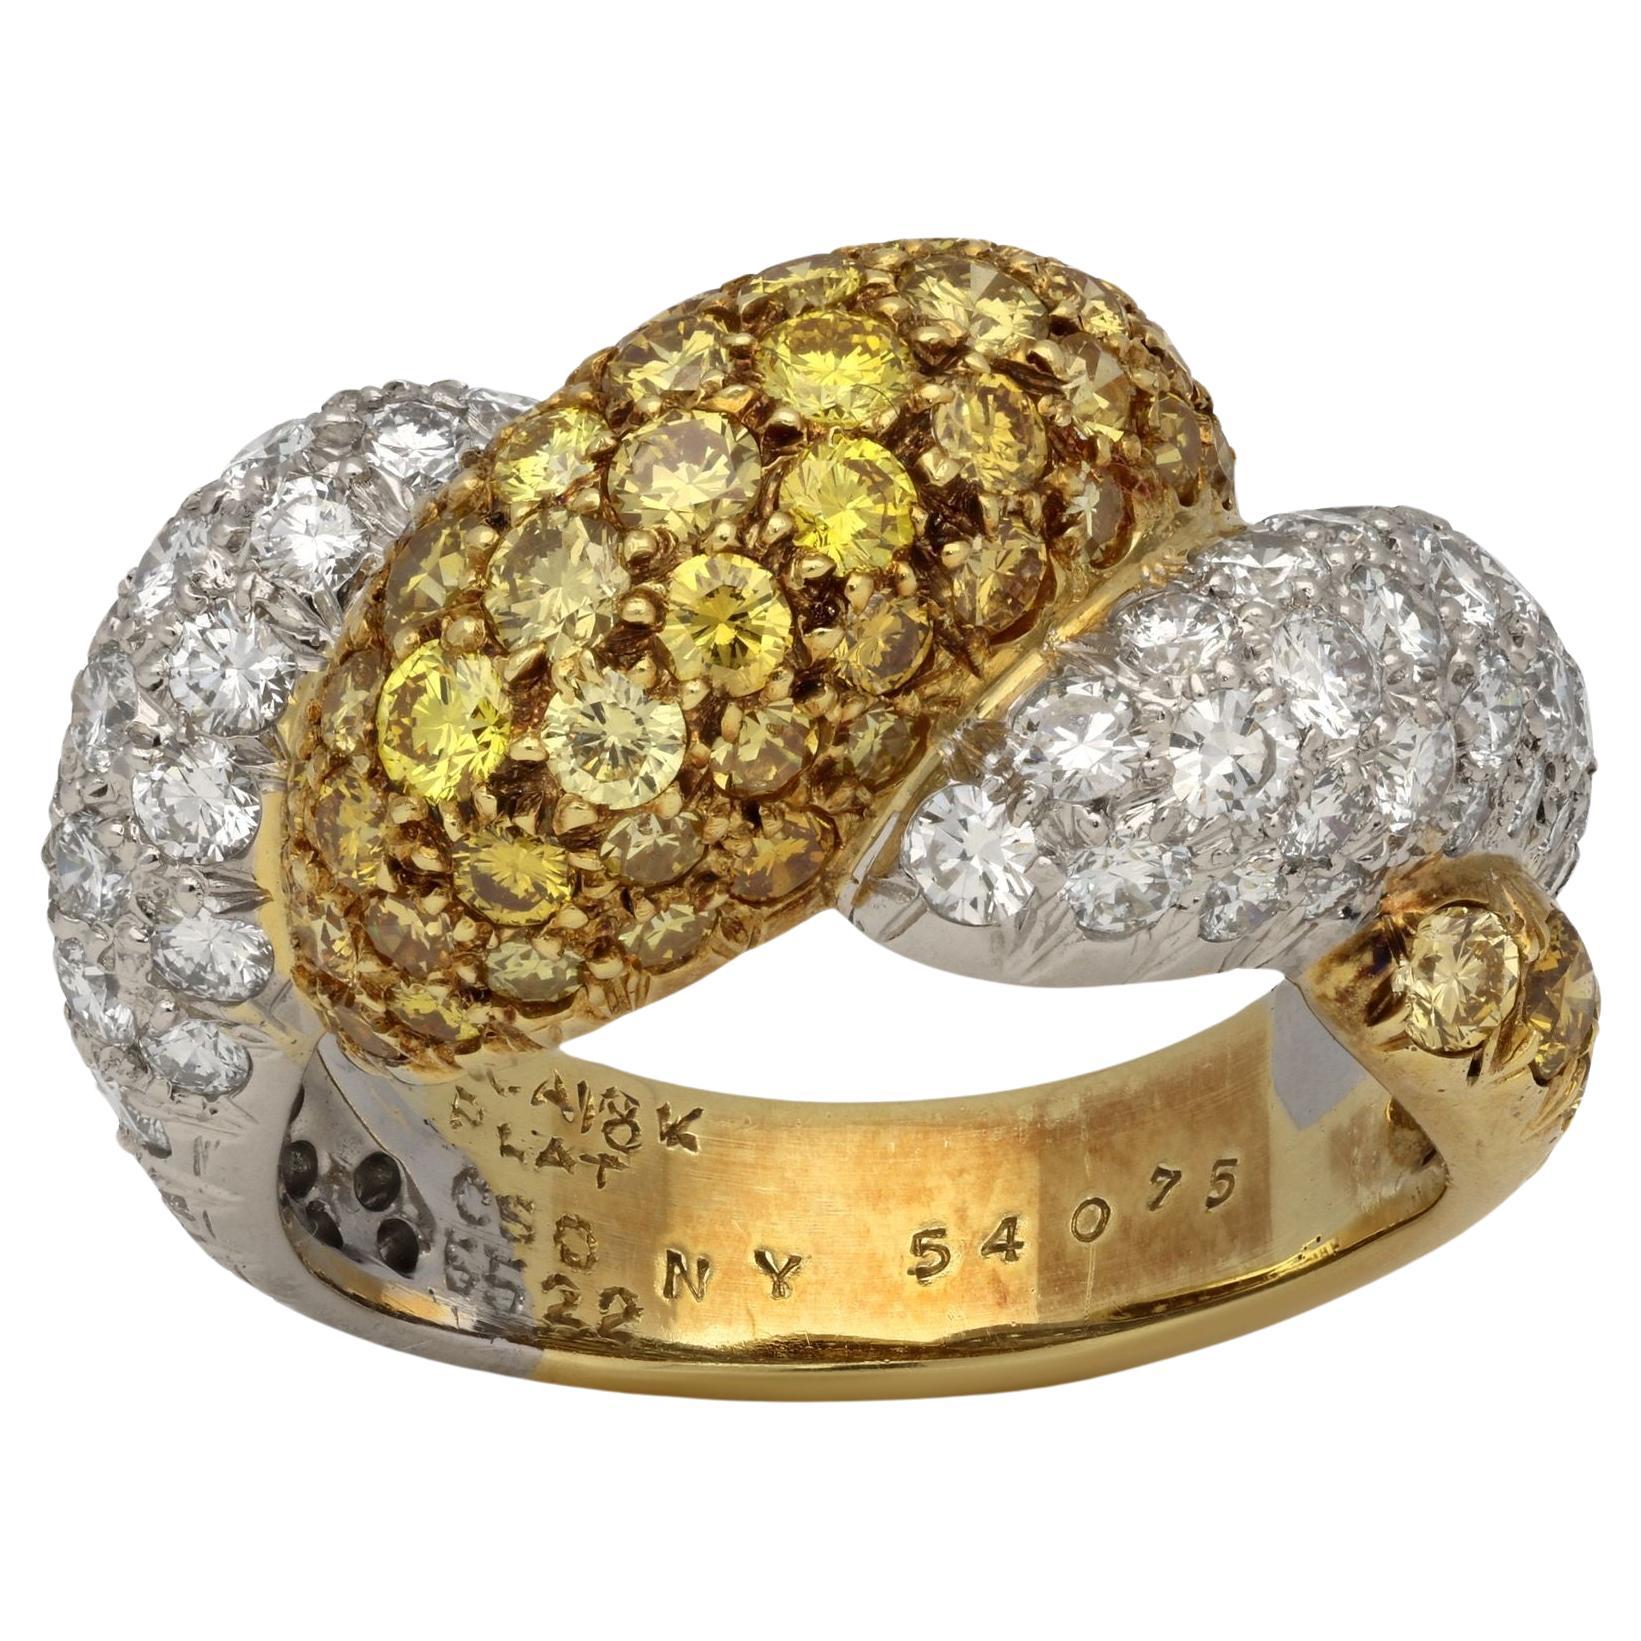 Van Cleef & Arpels Pavé Set Yellow And White Diamond Bombe Dress Ring Cira 1980 For Sale